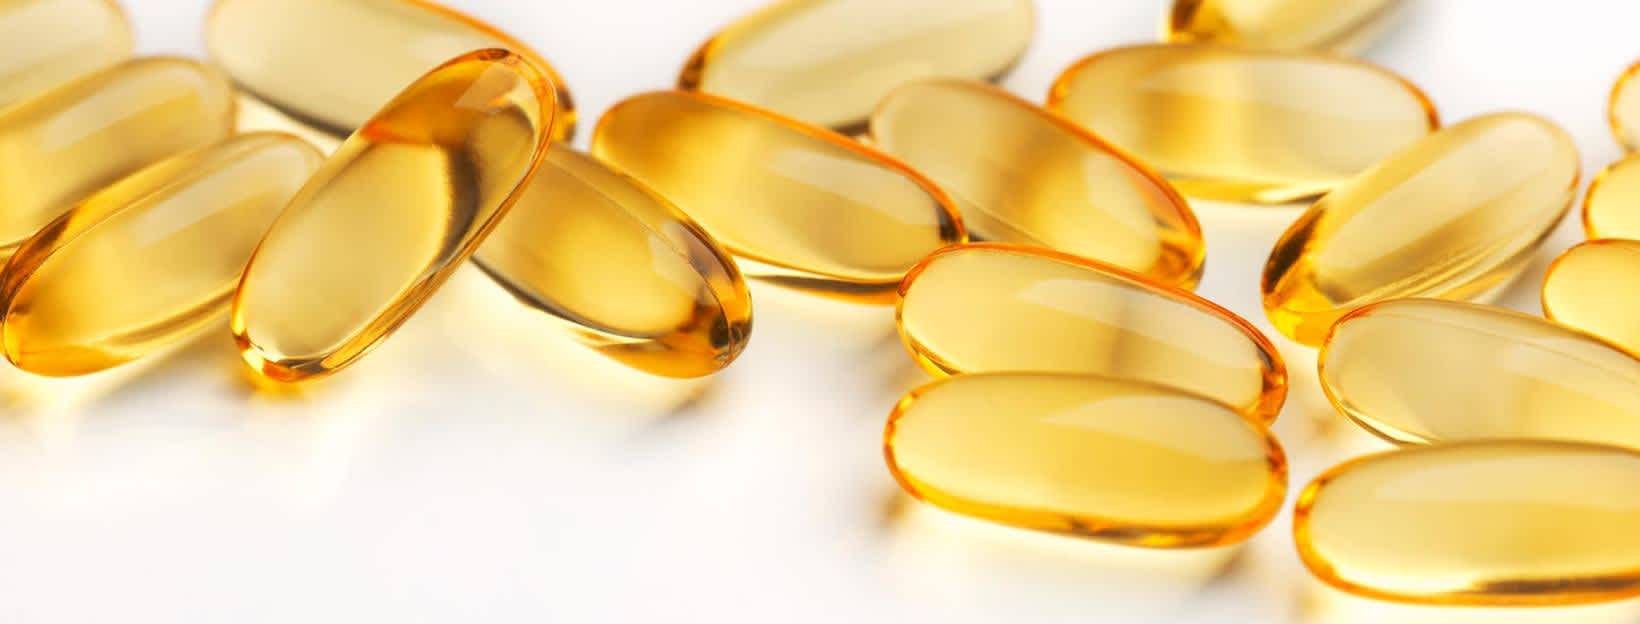 The Difference Between Prescription Fish Oil and Supplements